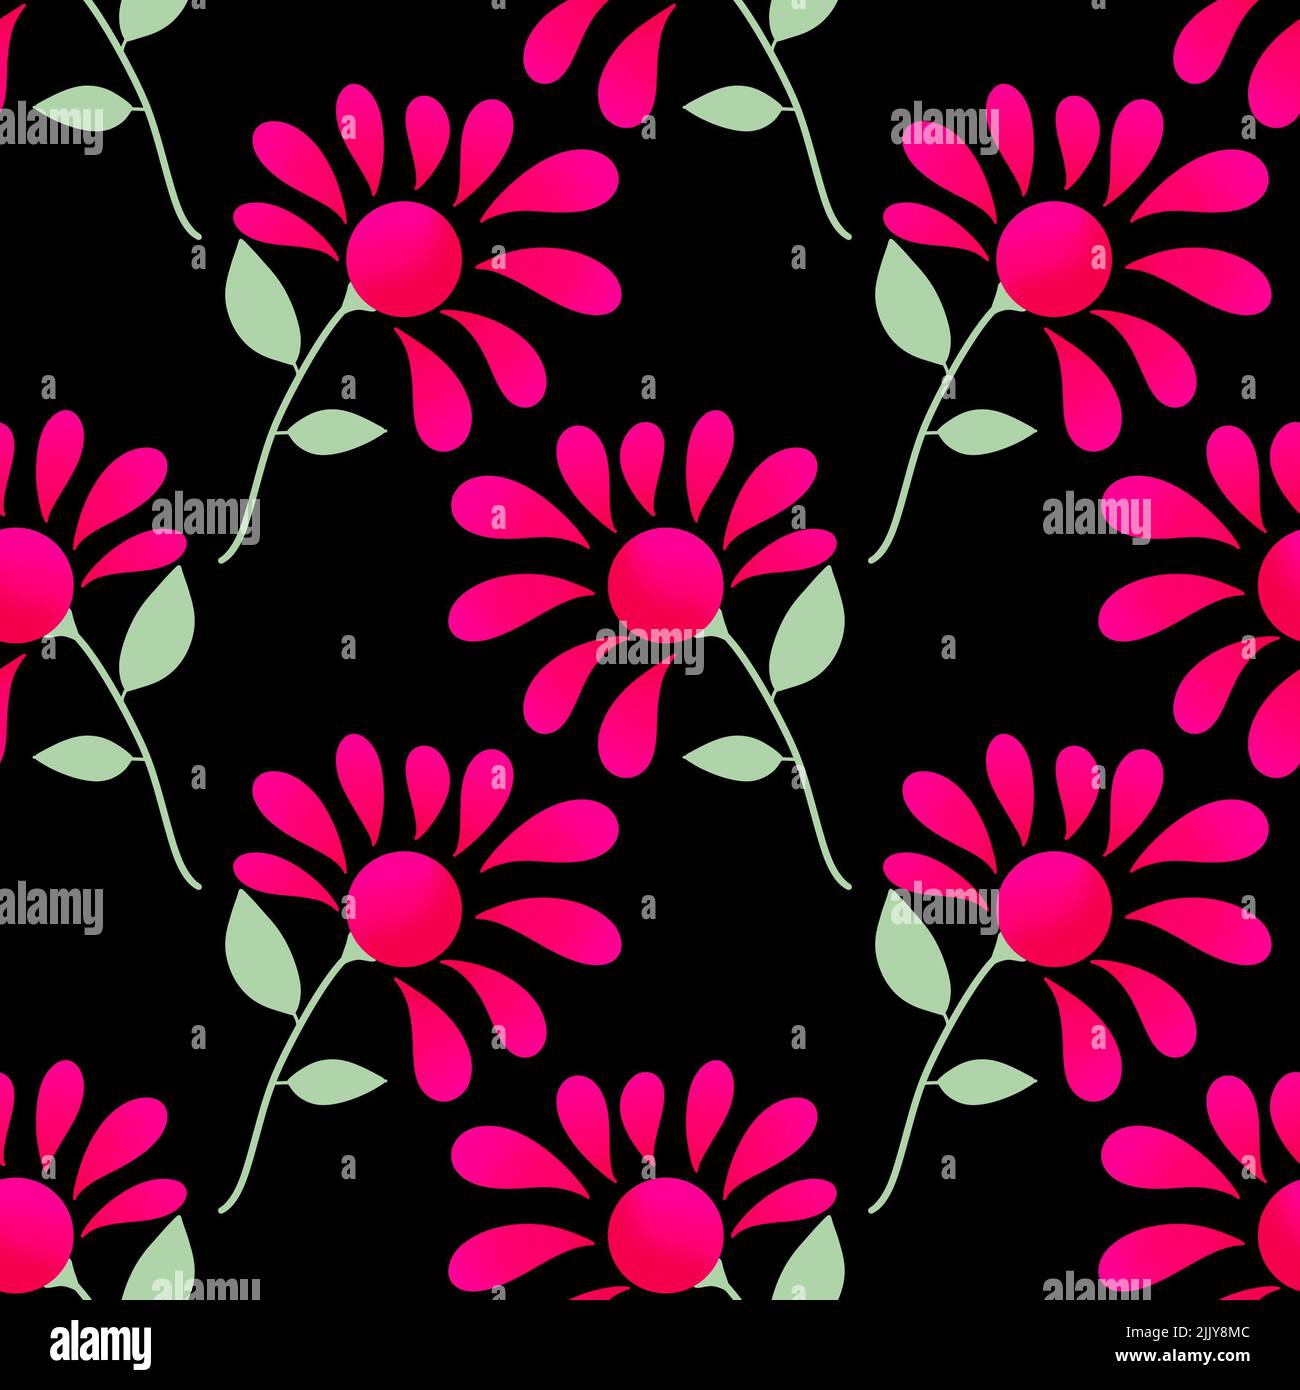 Simple floral seamless ethnic flower pattern for accessories and